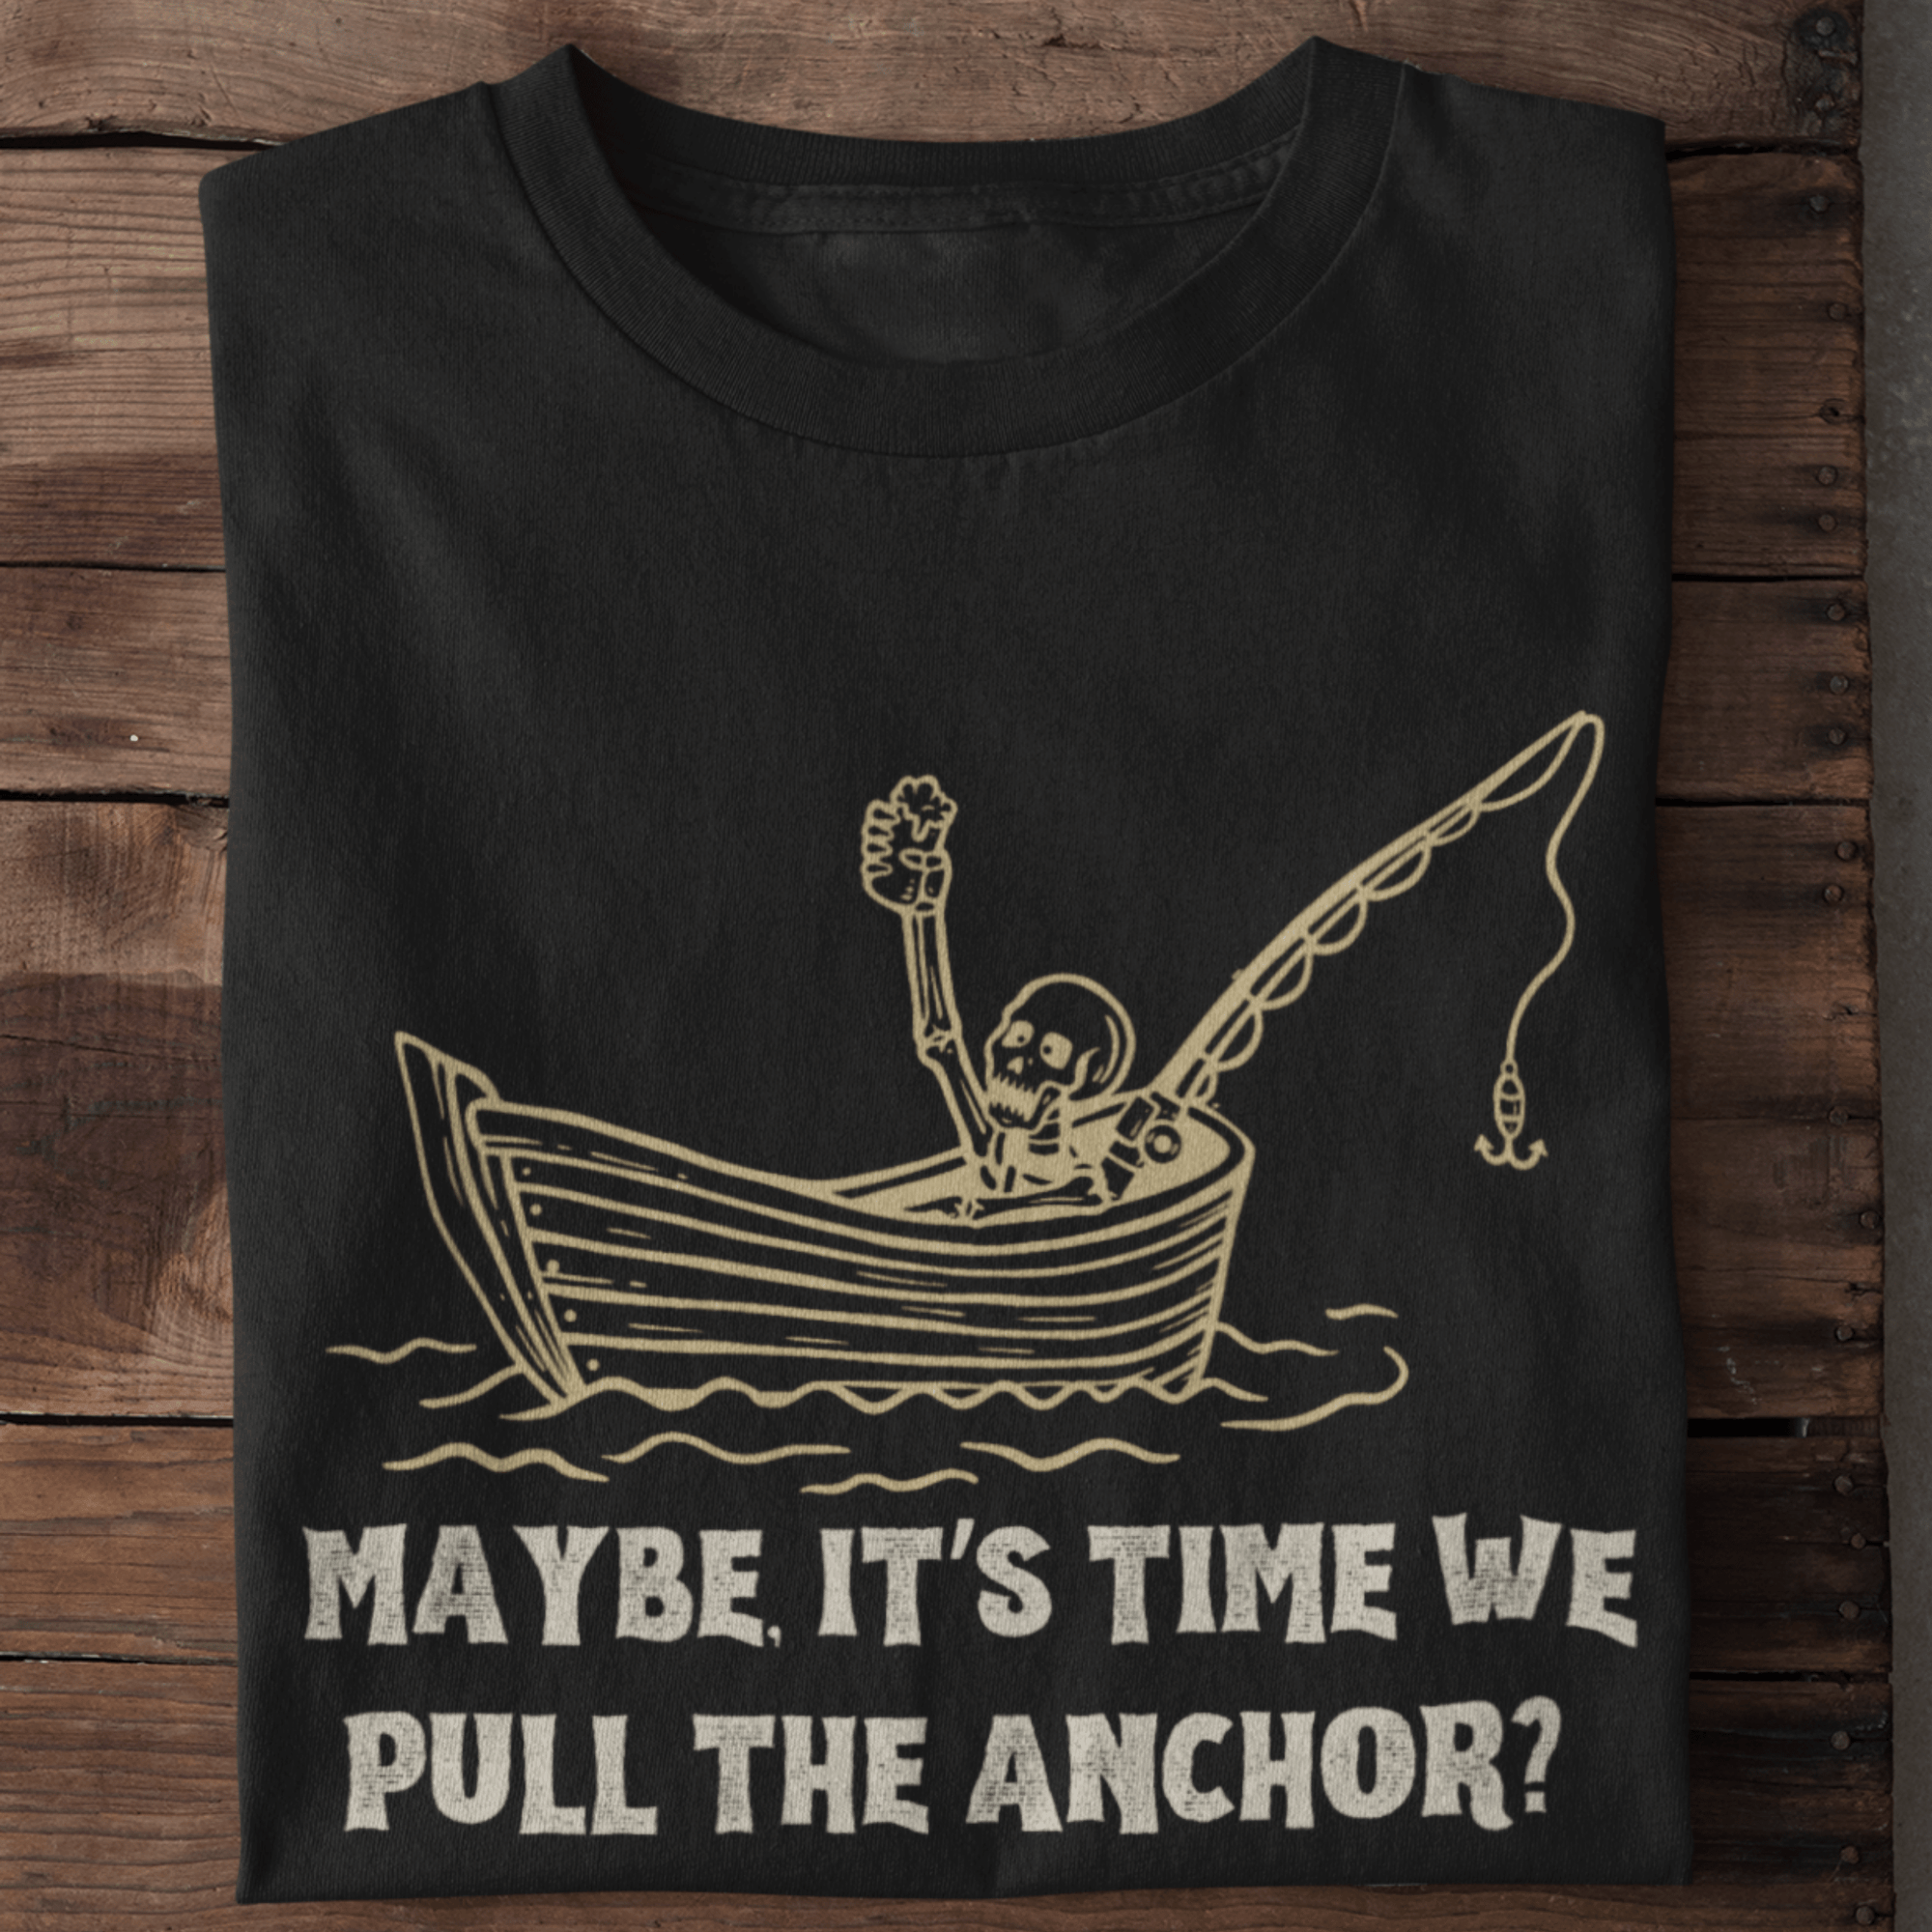 Maybe, It's Time We Pull the Anchor? T-Shirt